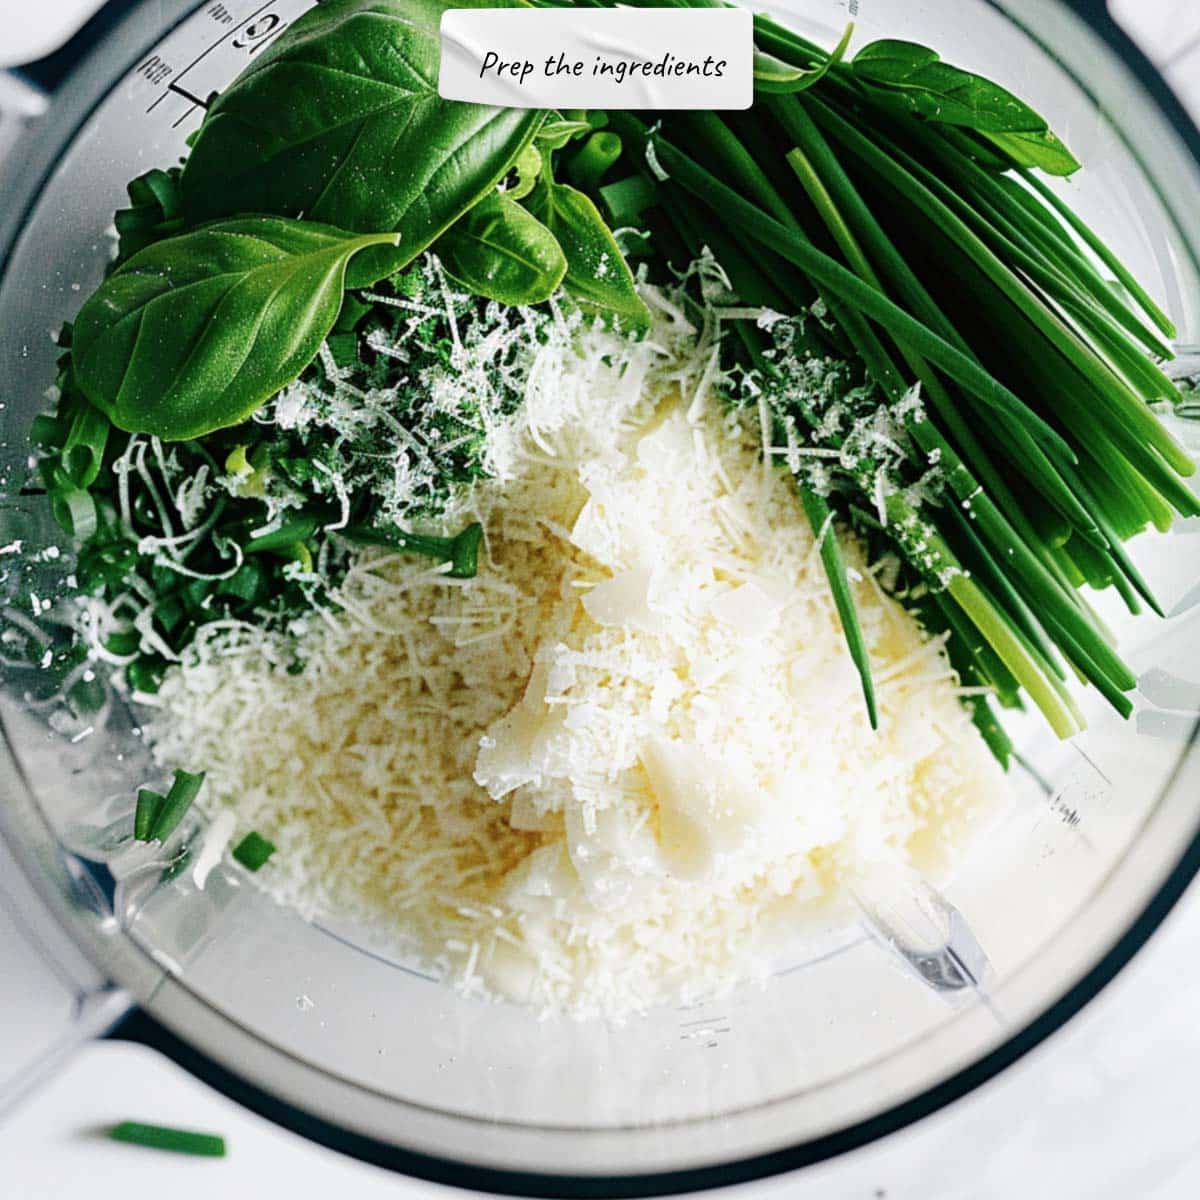 Basil, chives, garlic, and Parmesan cheese, ready to become a delicious basil sauce.